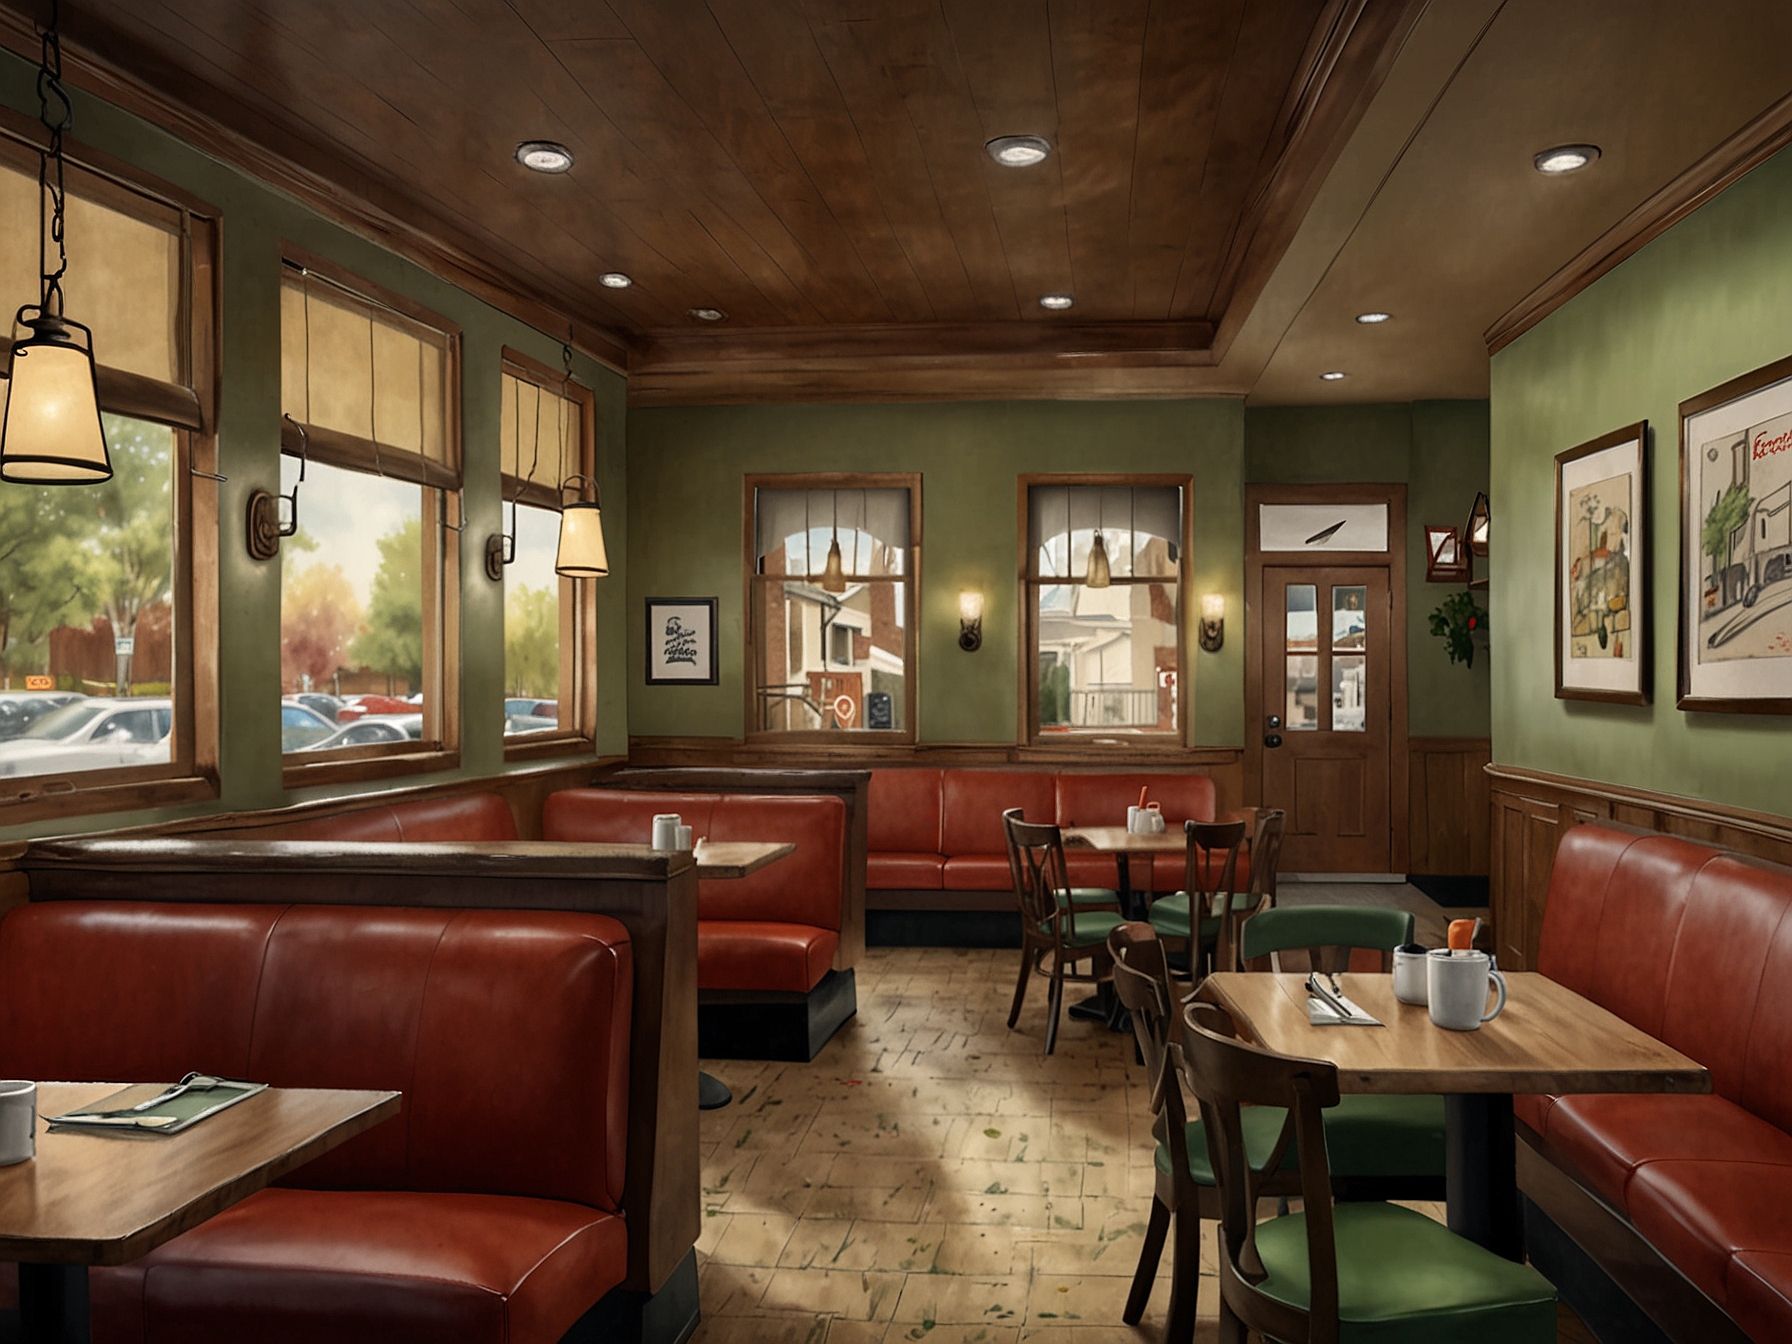 A newly renovated Perkins restaurant interior showcasing warm and inviting colors, comfortable seating, and nostalgic decor, highlighting the chain's 'vintage fresh' rebrand.